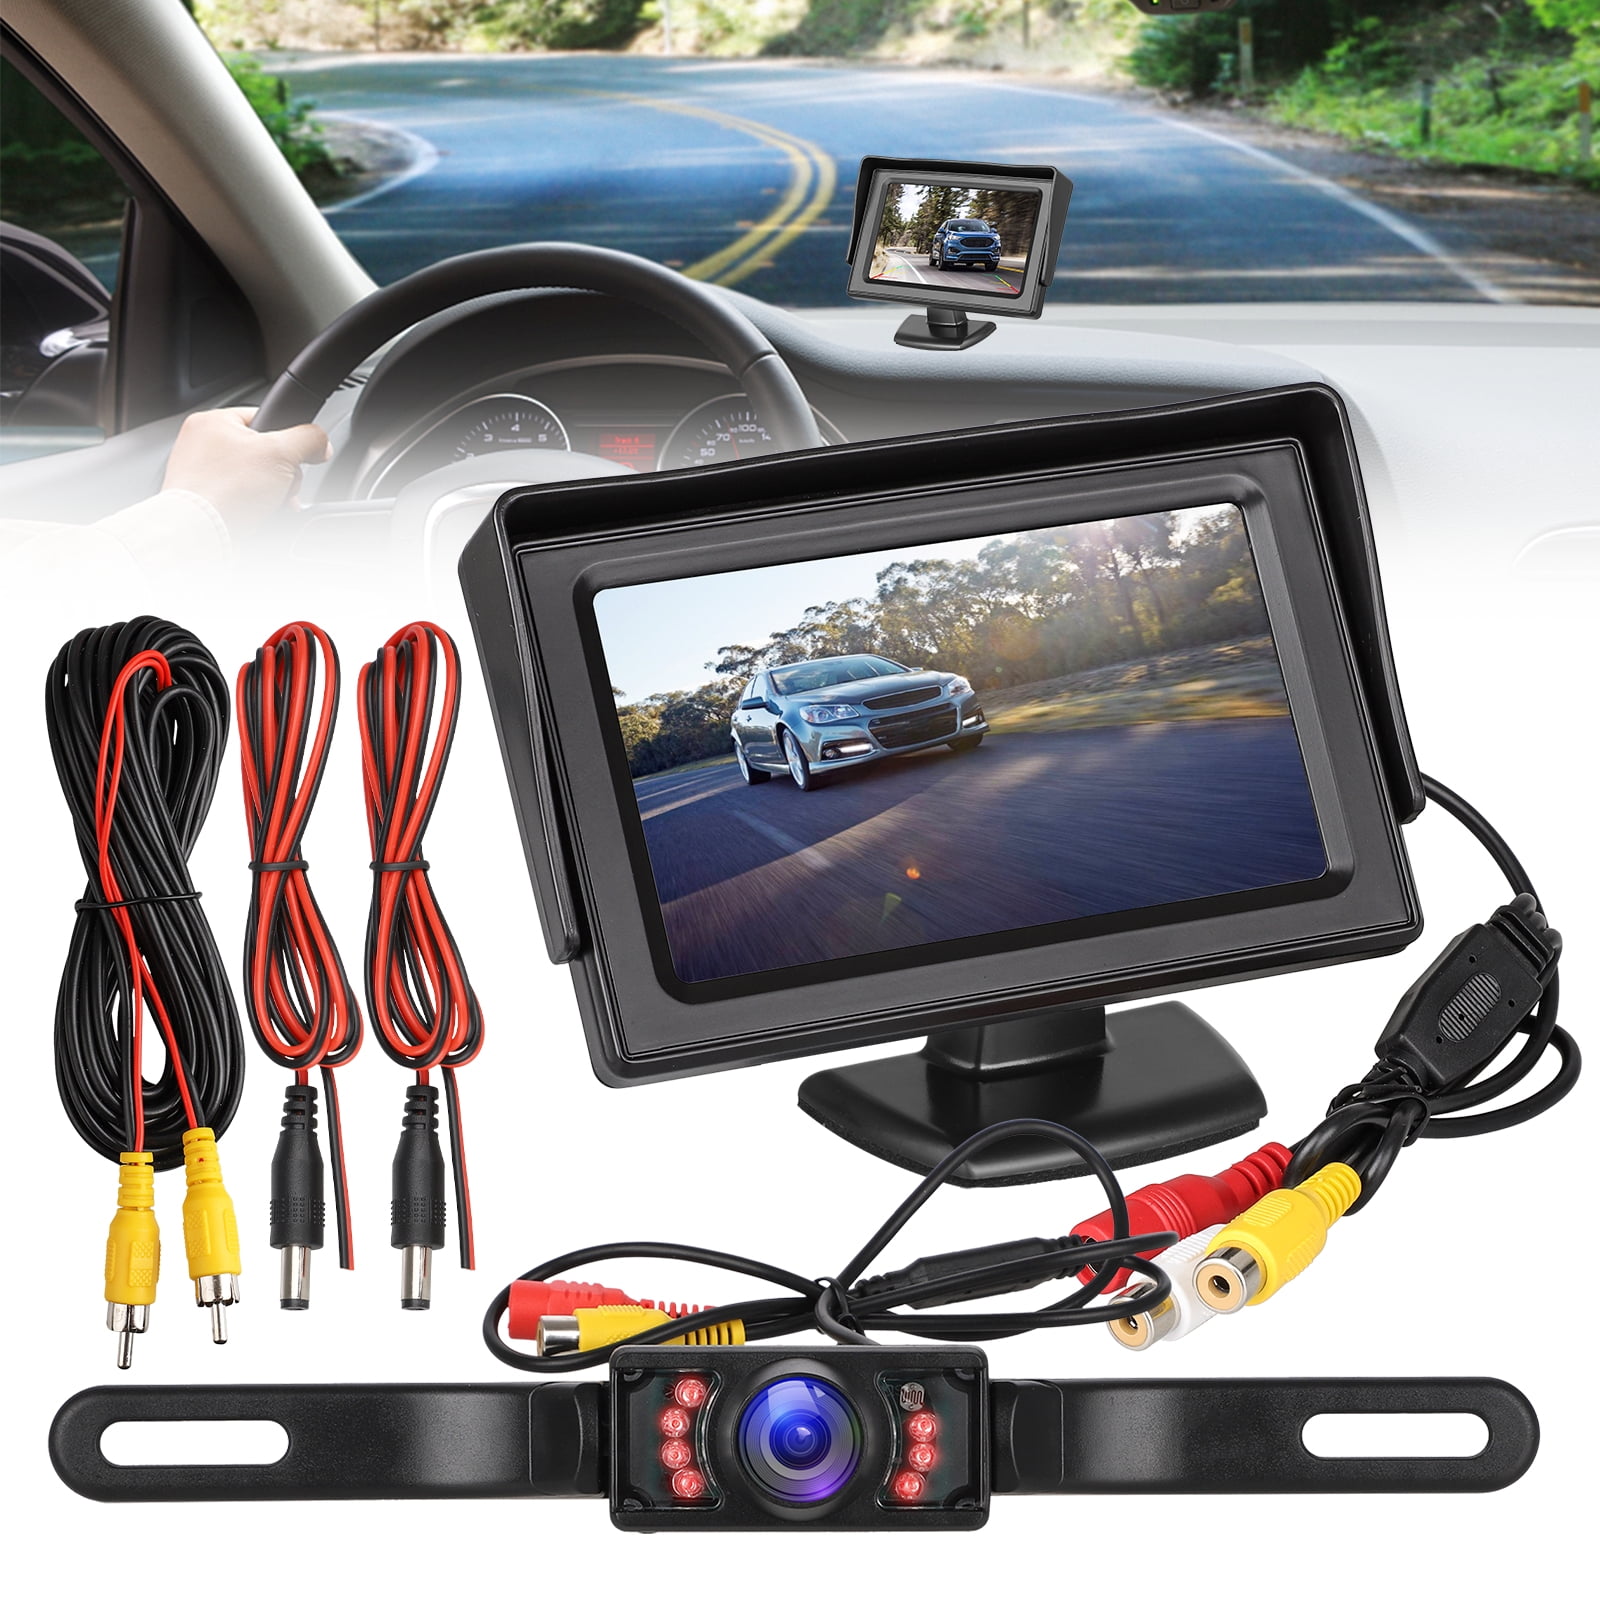 Podofo Backup Camera for Car 4 Pins Connector Design 8 LED Reversing Camera with 4.3 TFT LCD Rear View Mirror Monitor Parking System 5558990432 